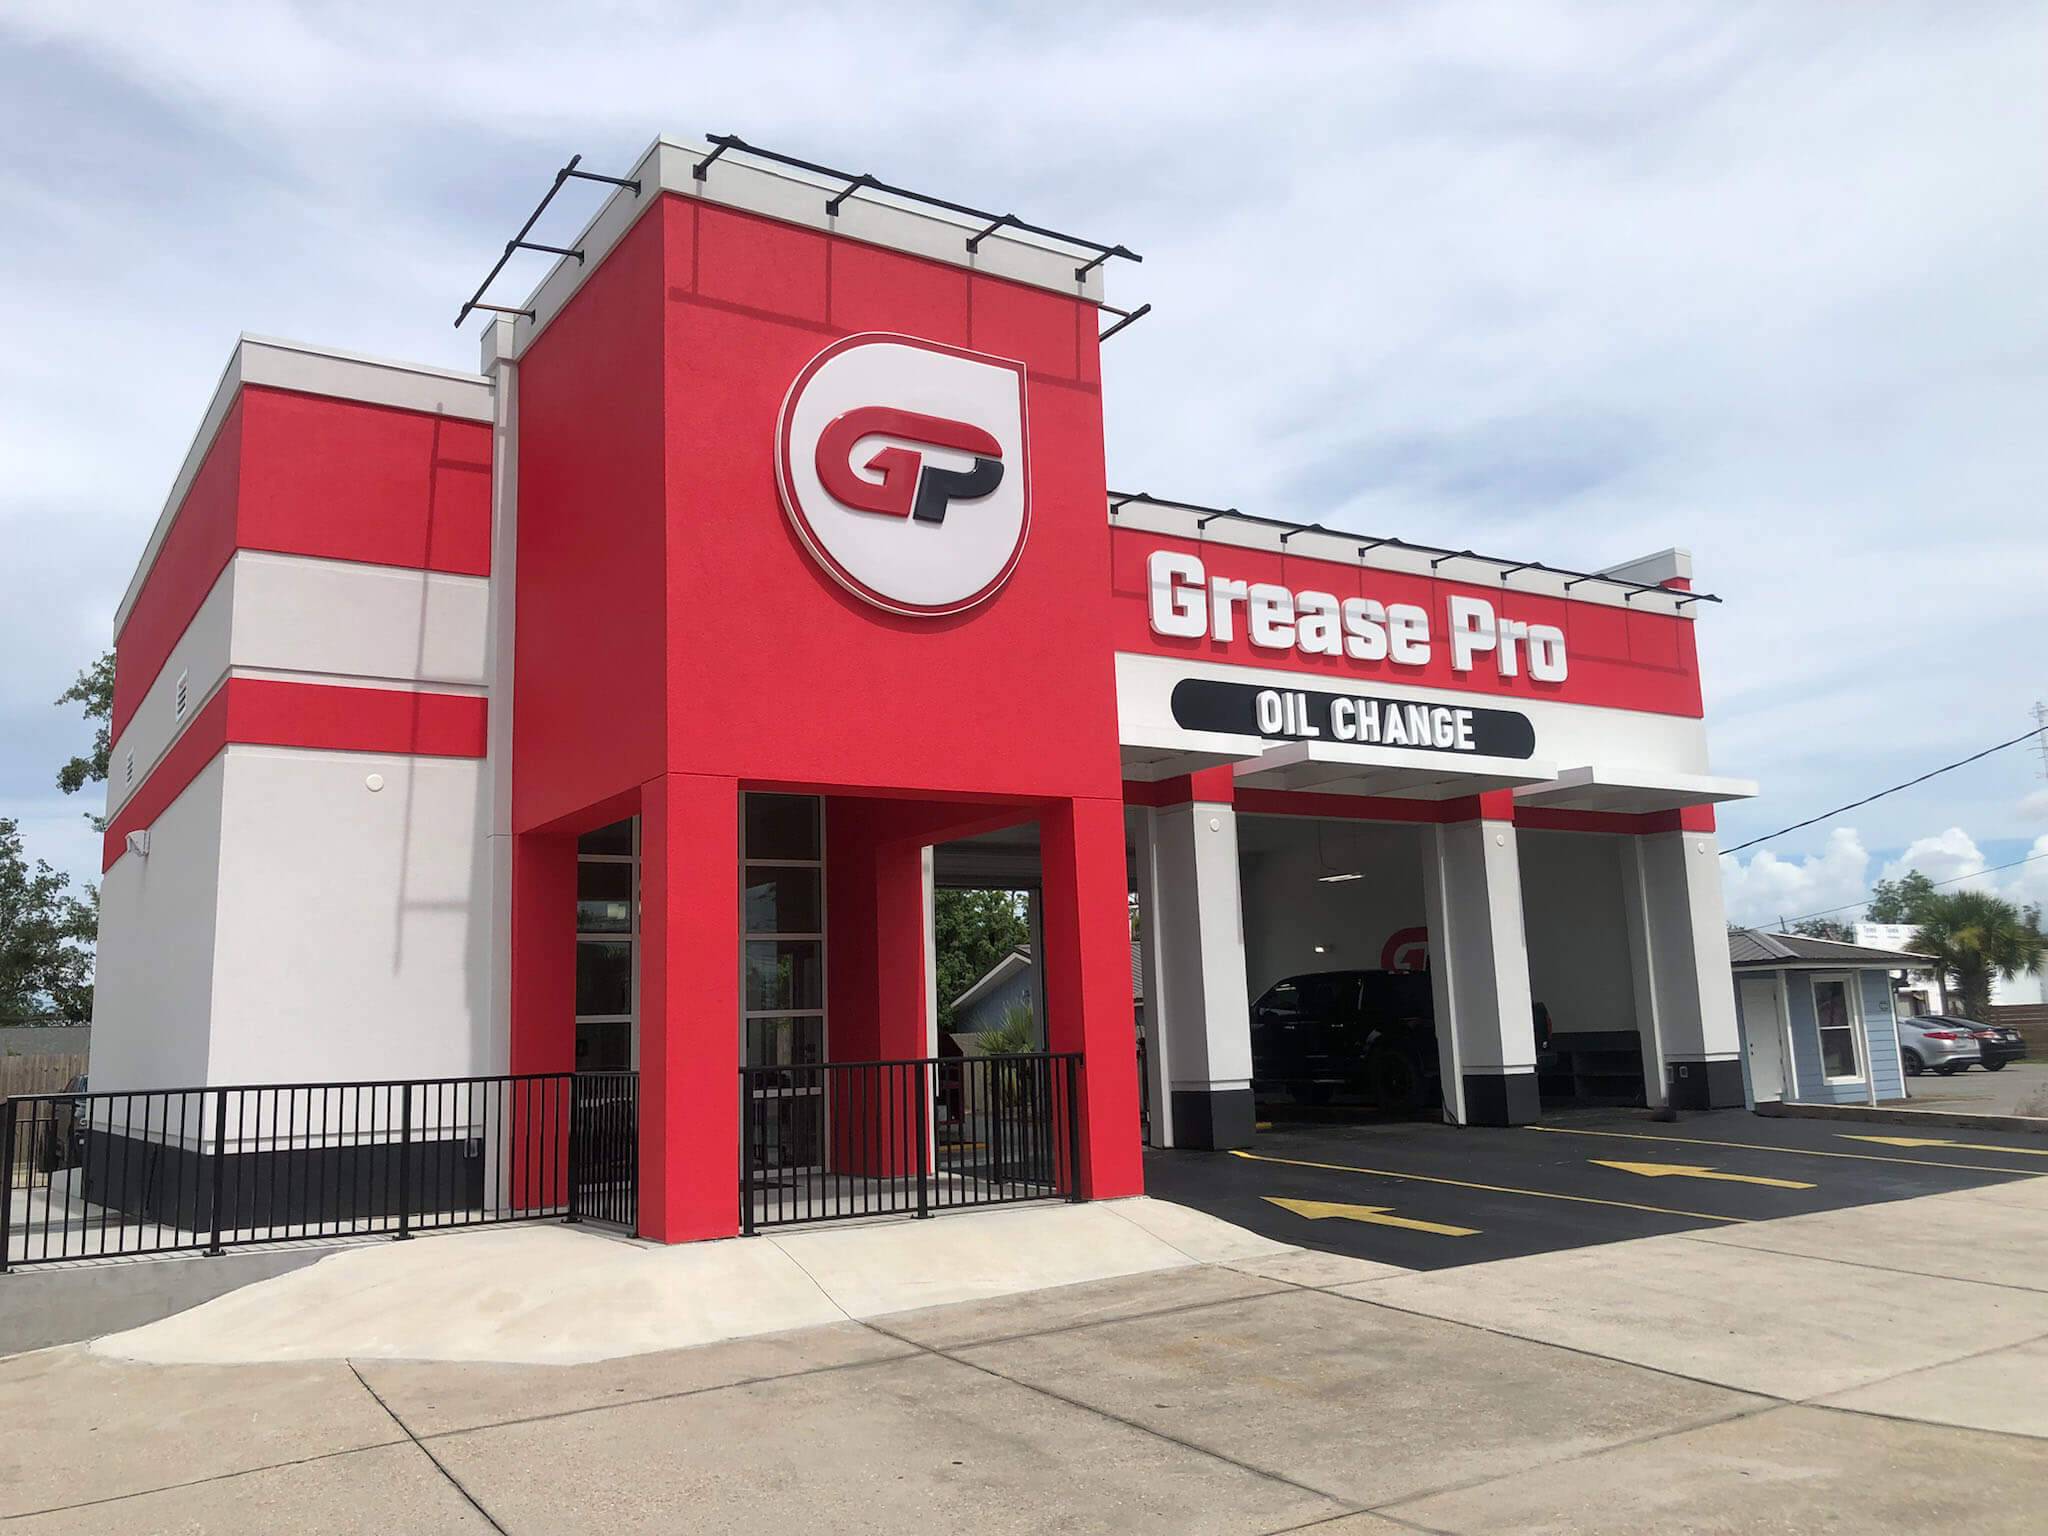 Grease Pro Oil Change building 